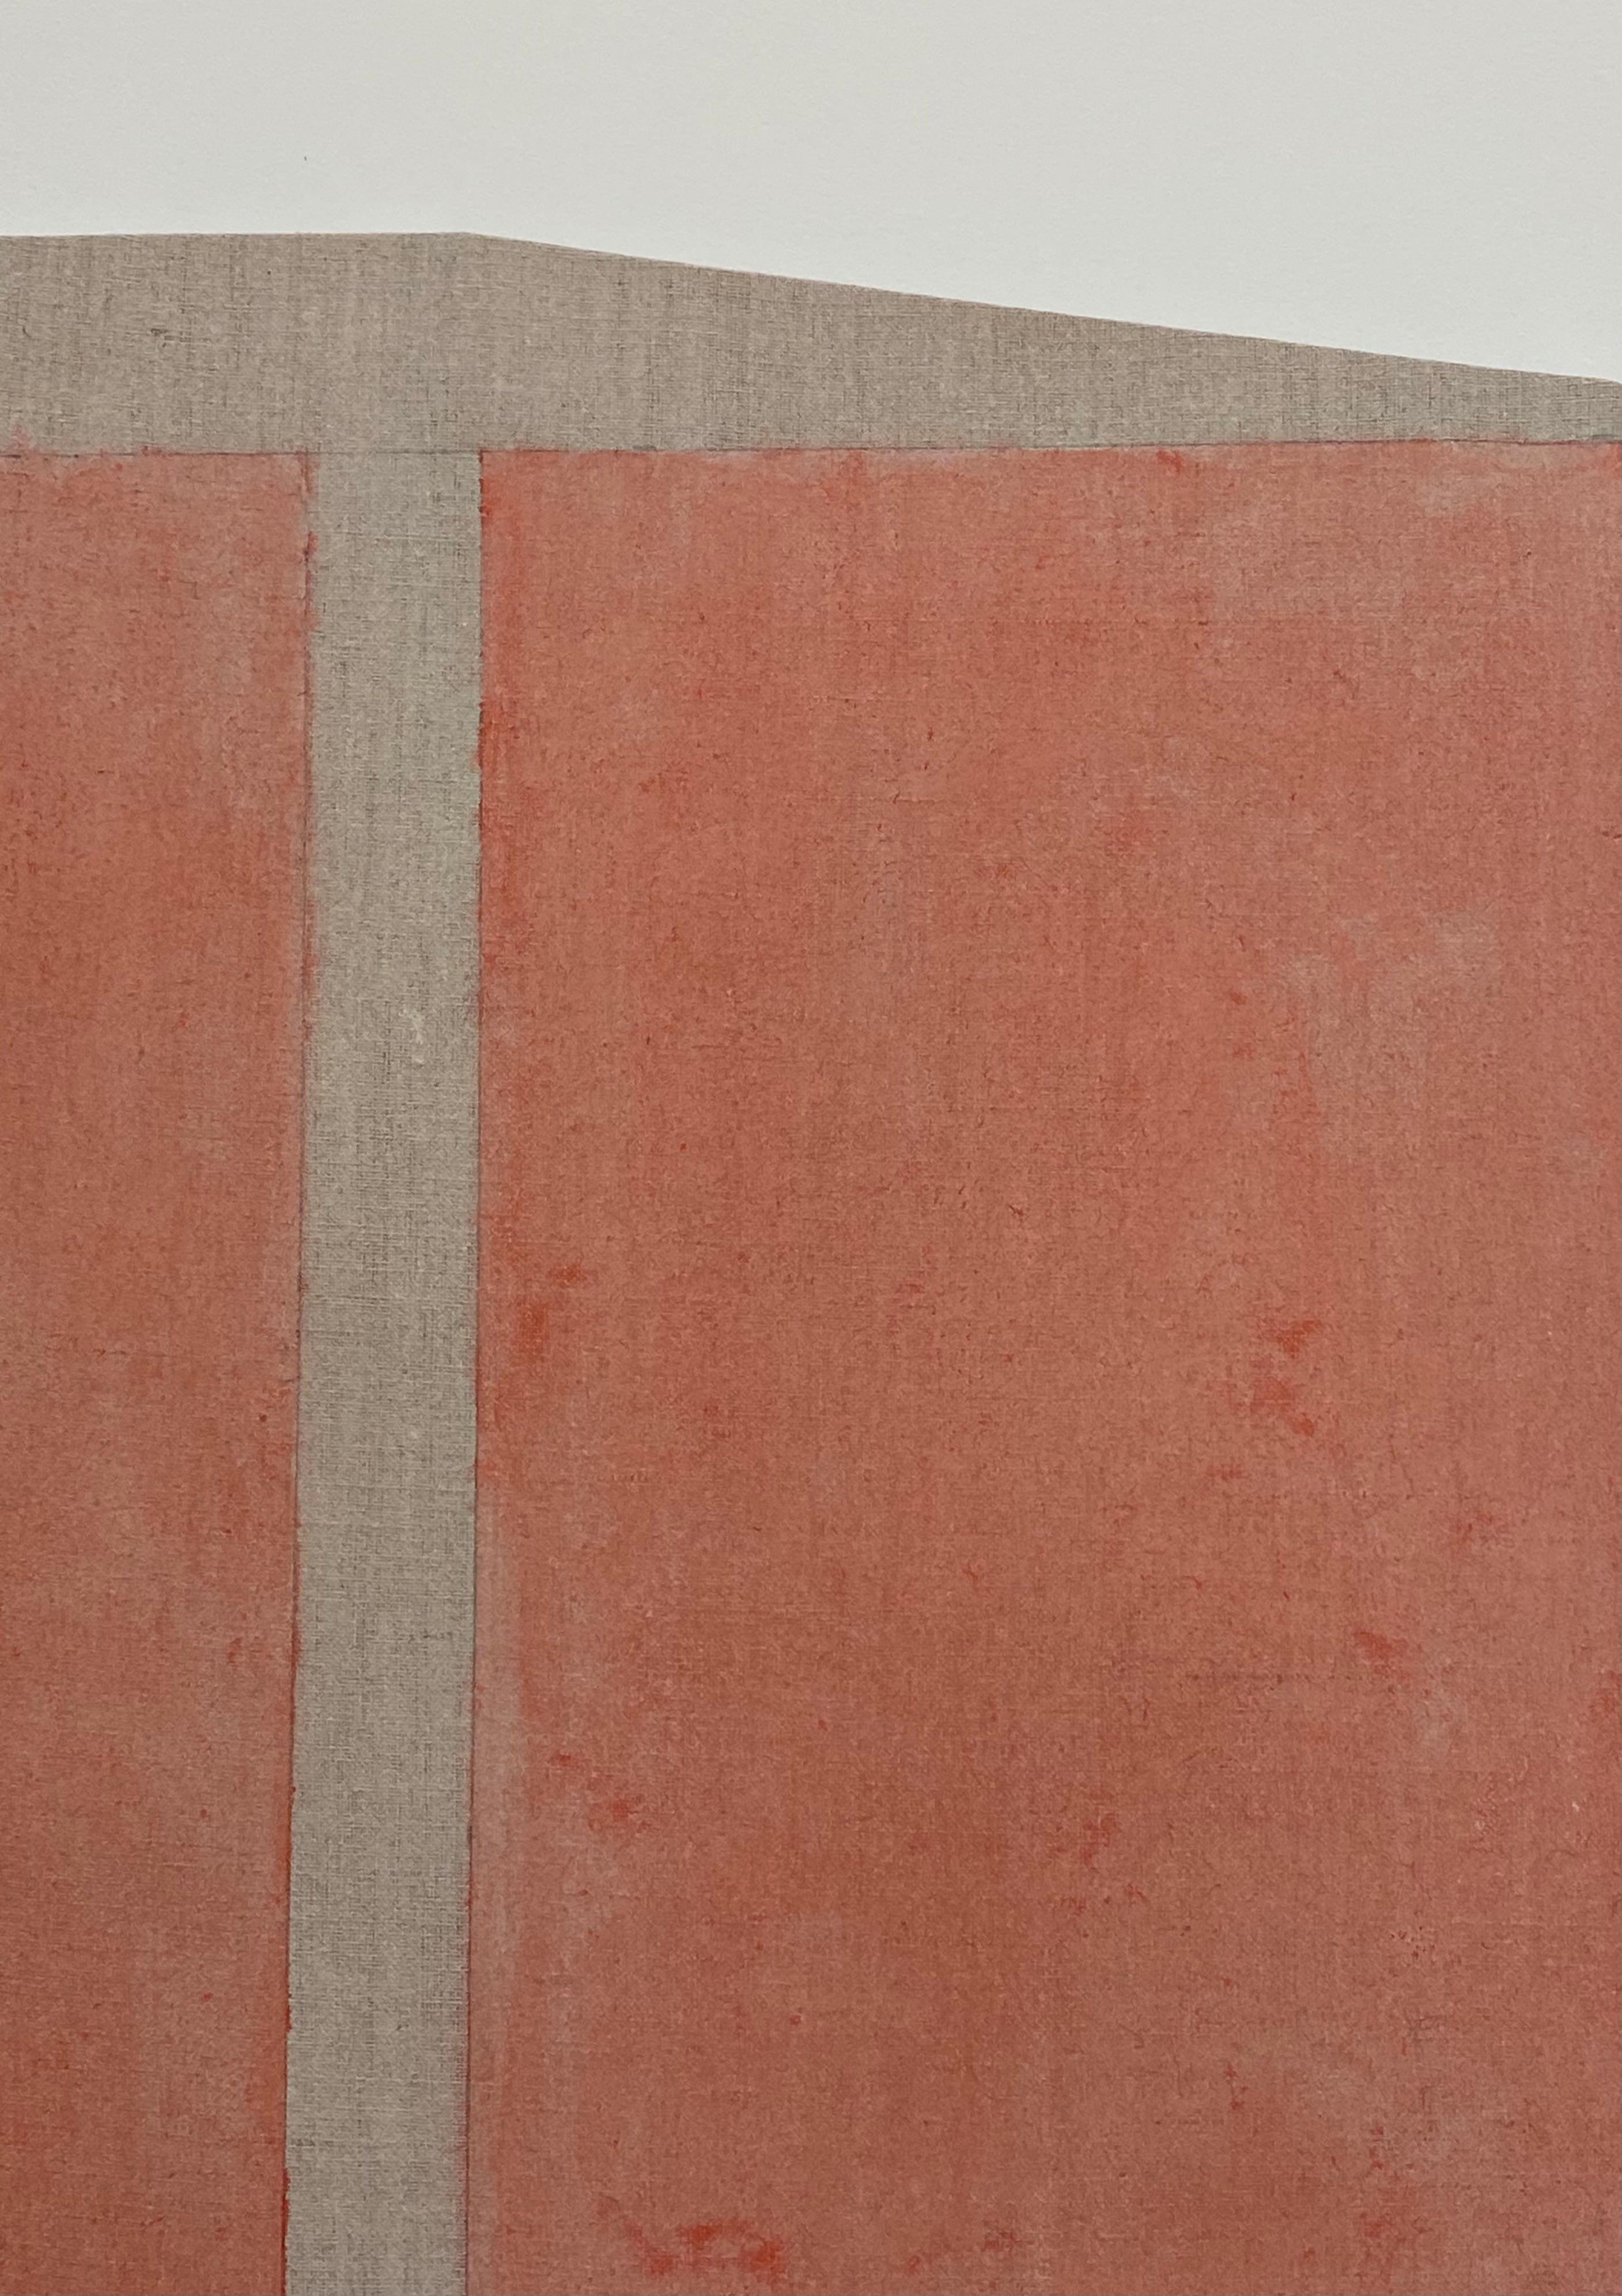 In this painting in graphite and acrylic on linen mounted on a shaped panel by Elizabeth Gourlay, carefully ordered blocks of color in a warm, coral shade of orange are vibrant against the neutral, earthy beige linen surface. Signed, dated and